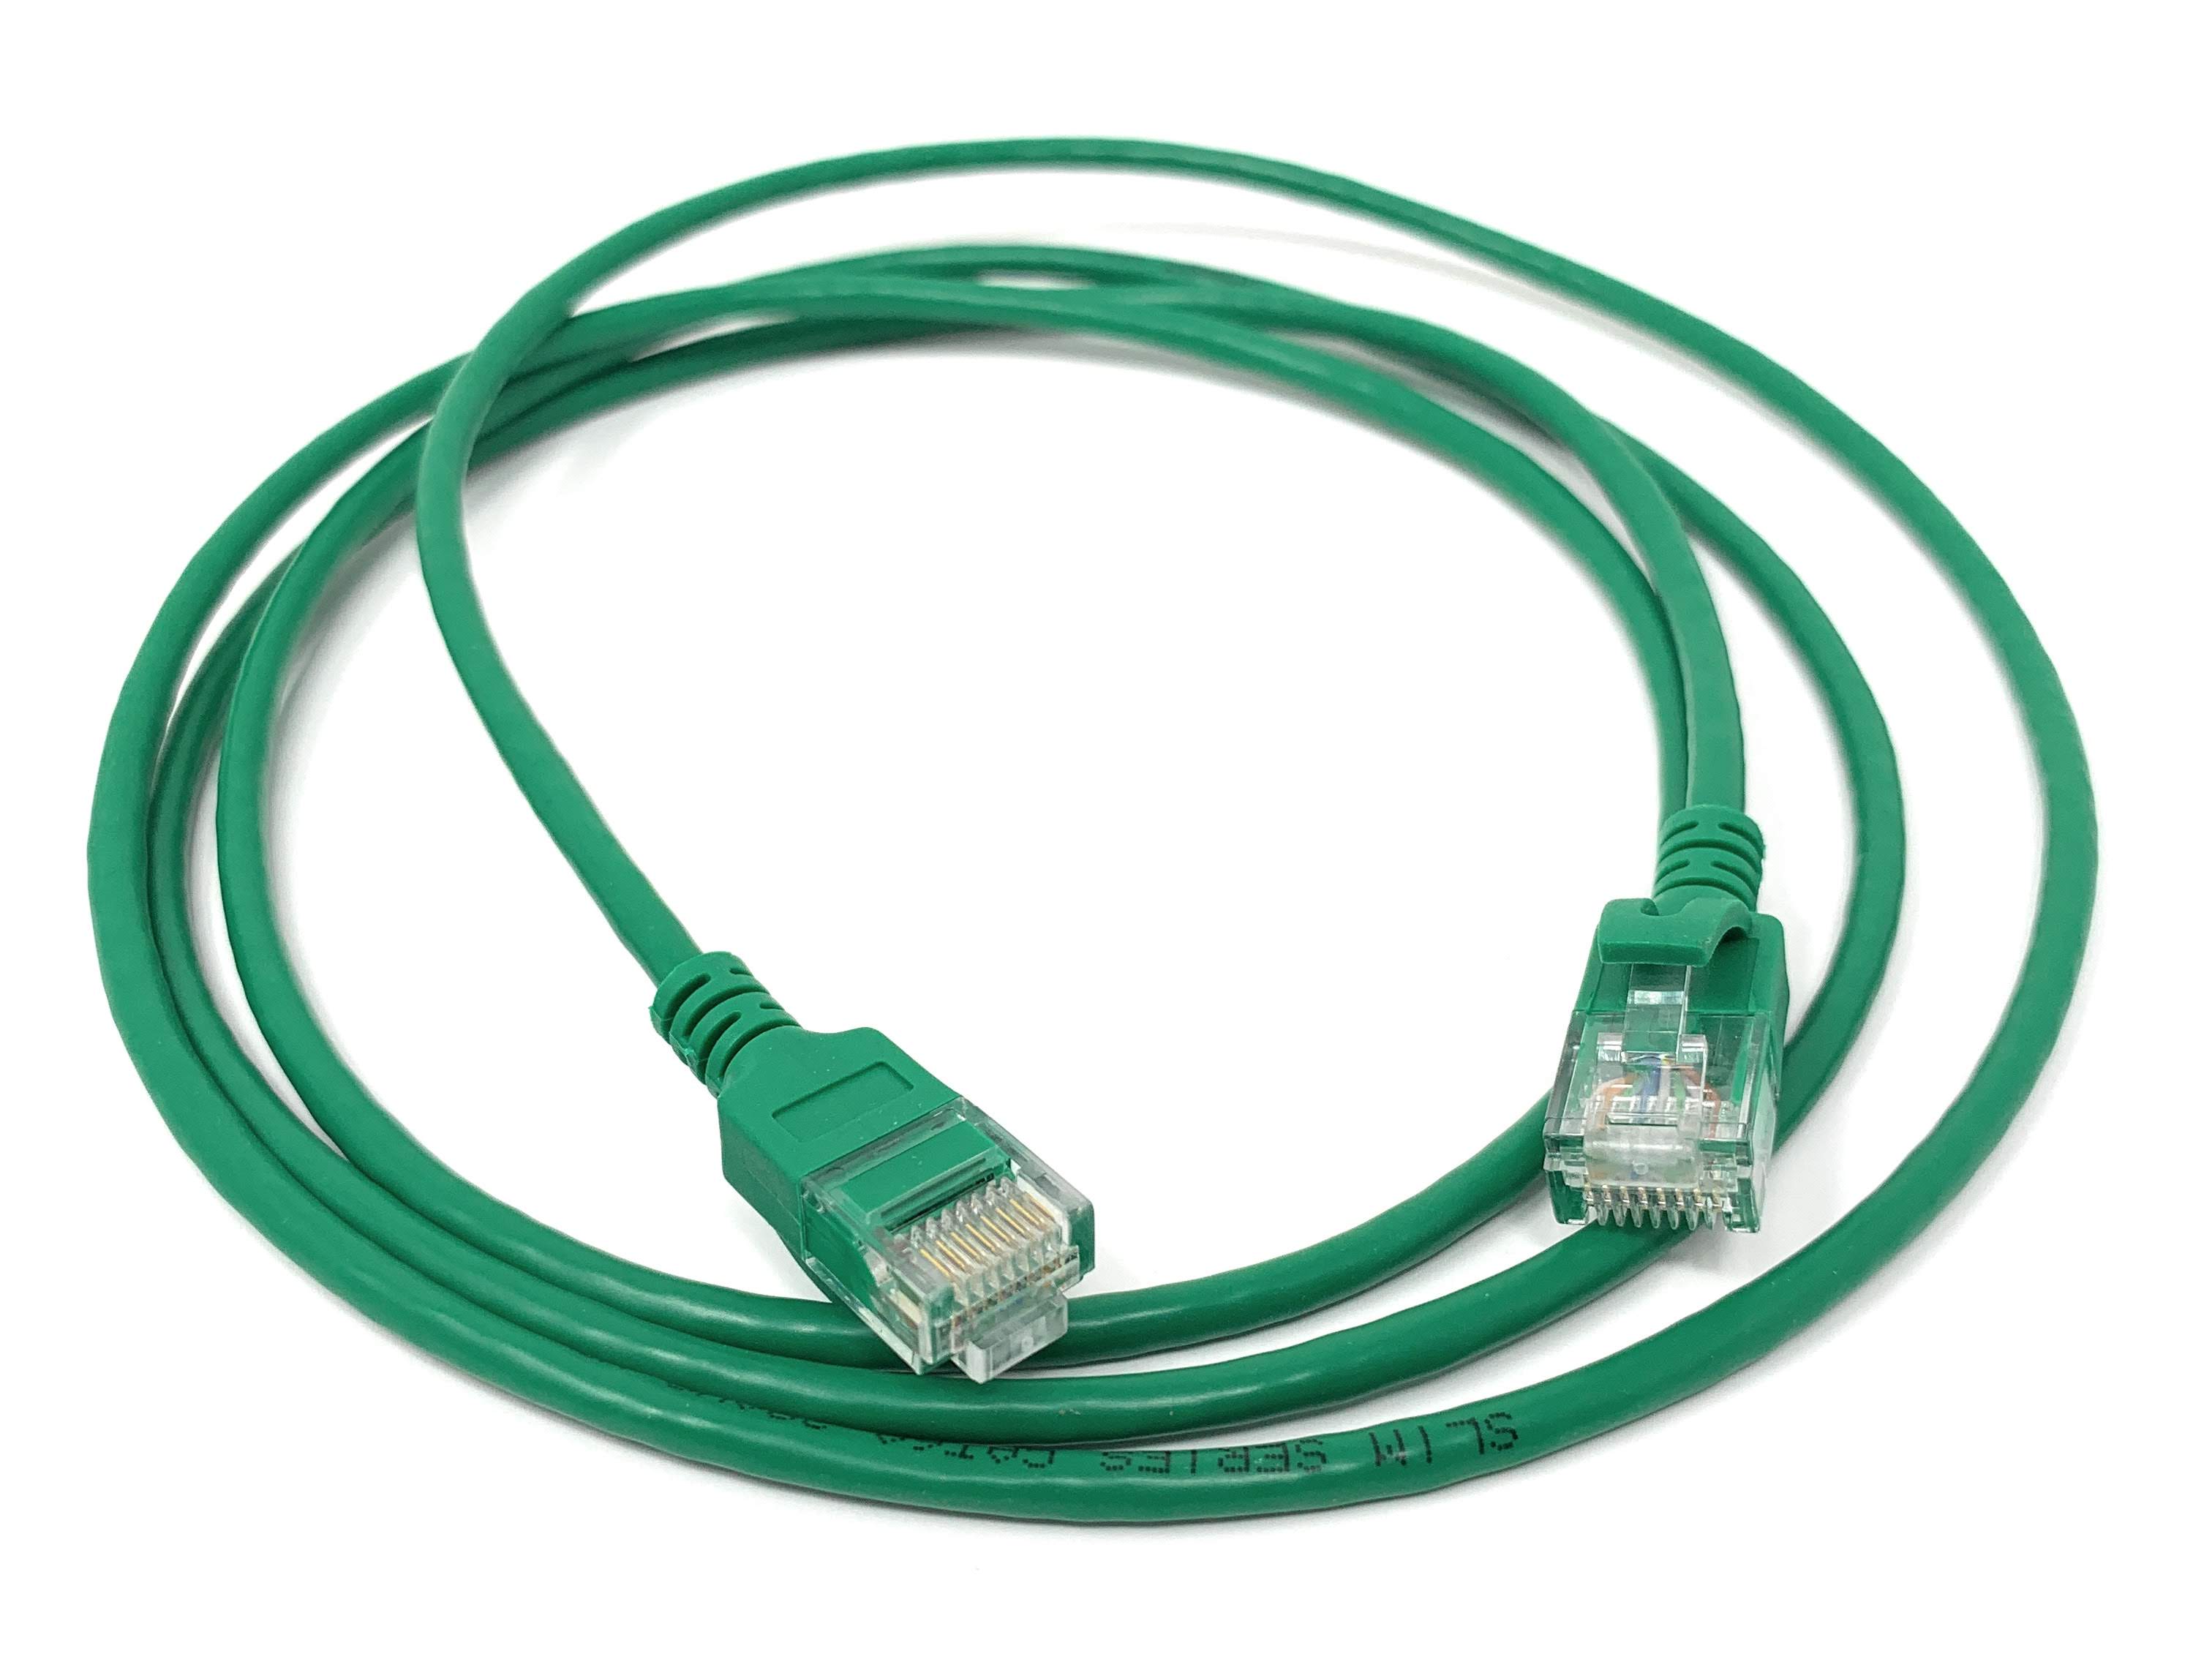 Category 6a 28awg Patch Cables with Slim Jacket- 1.5 Feet